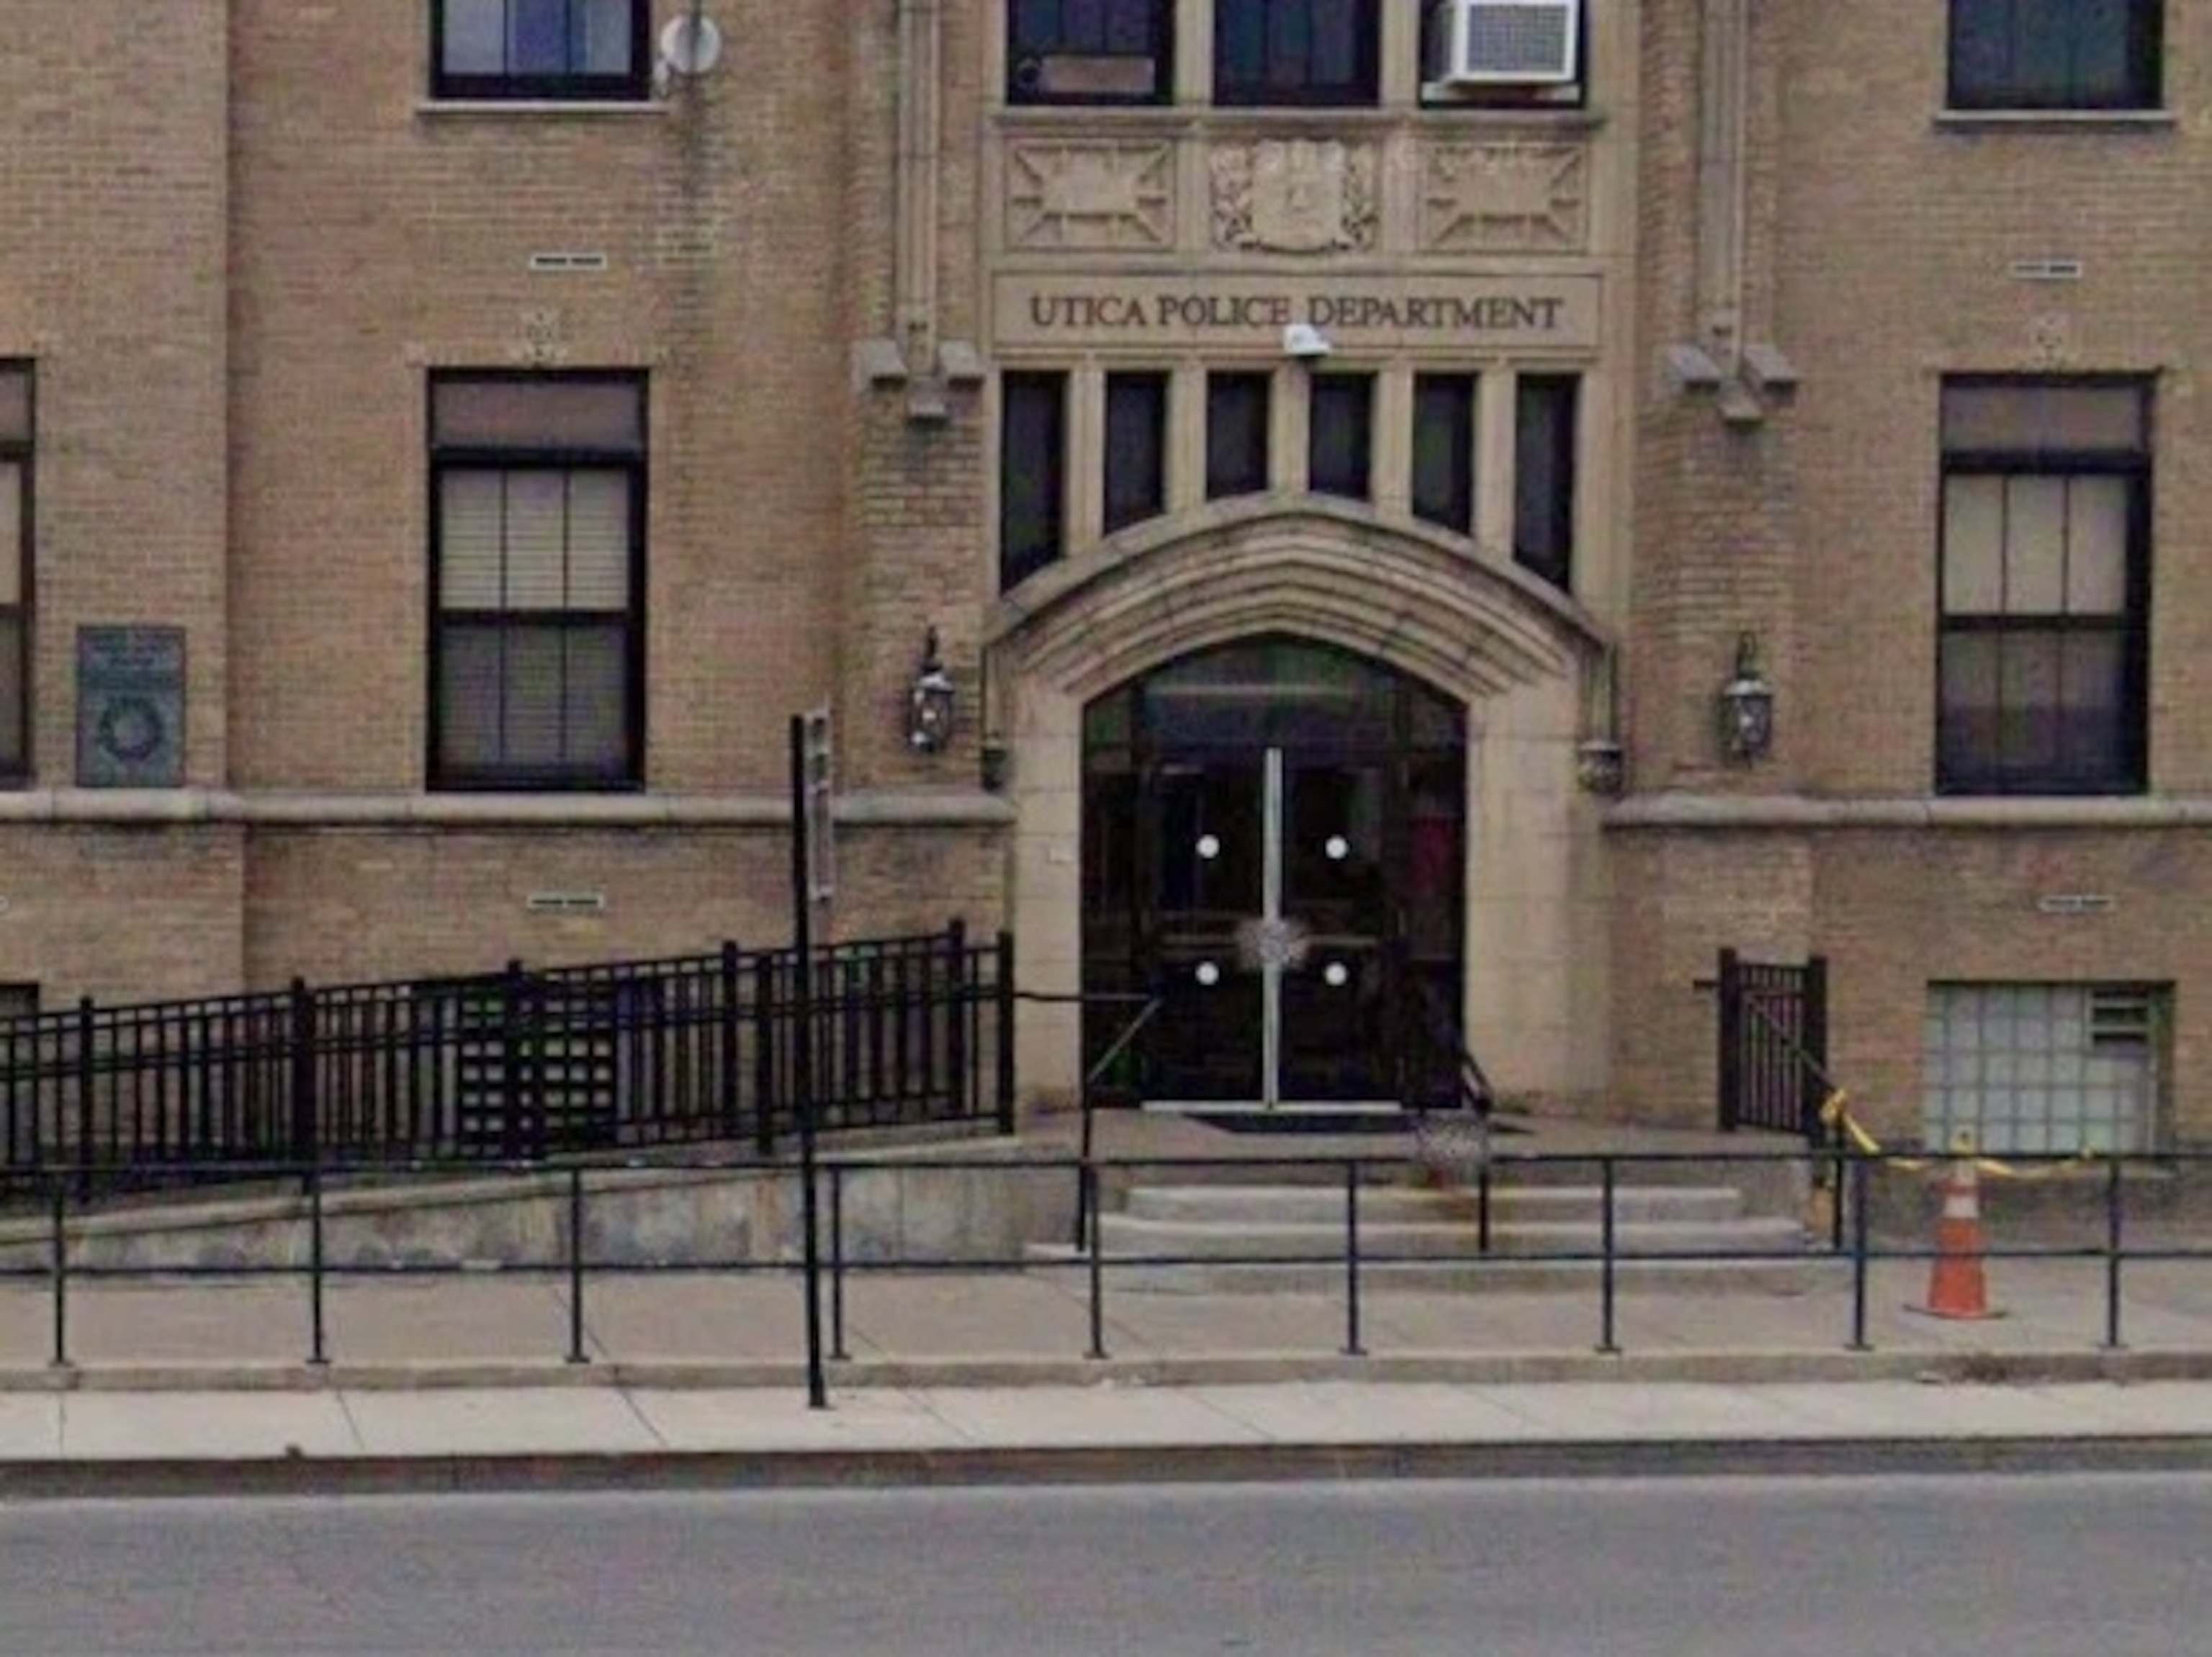 PHOTO: In this screen grab taken from Google Maps Street View, the Utical Police Department headquarters is shown in Utica, New York.